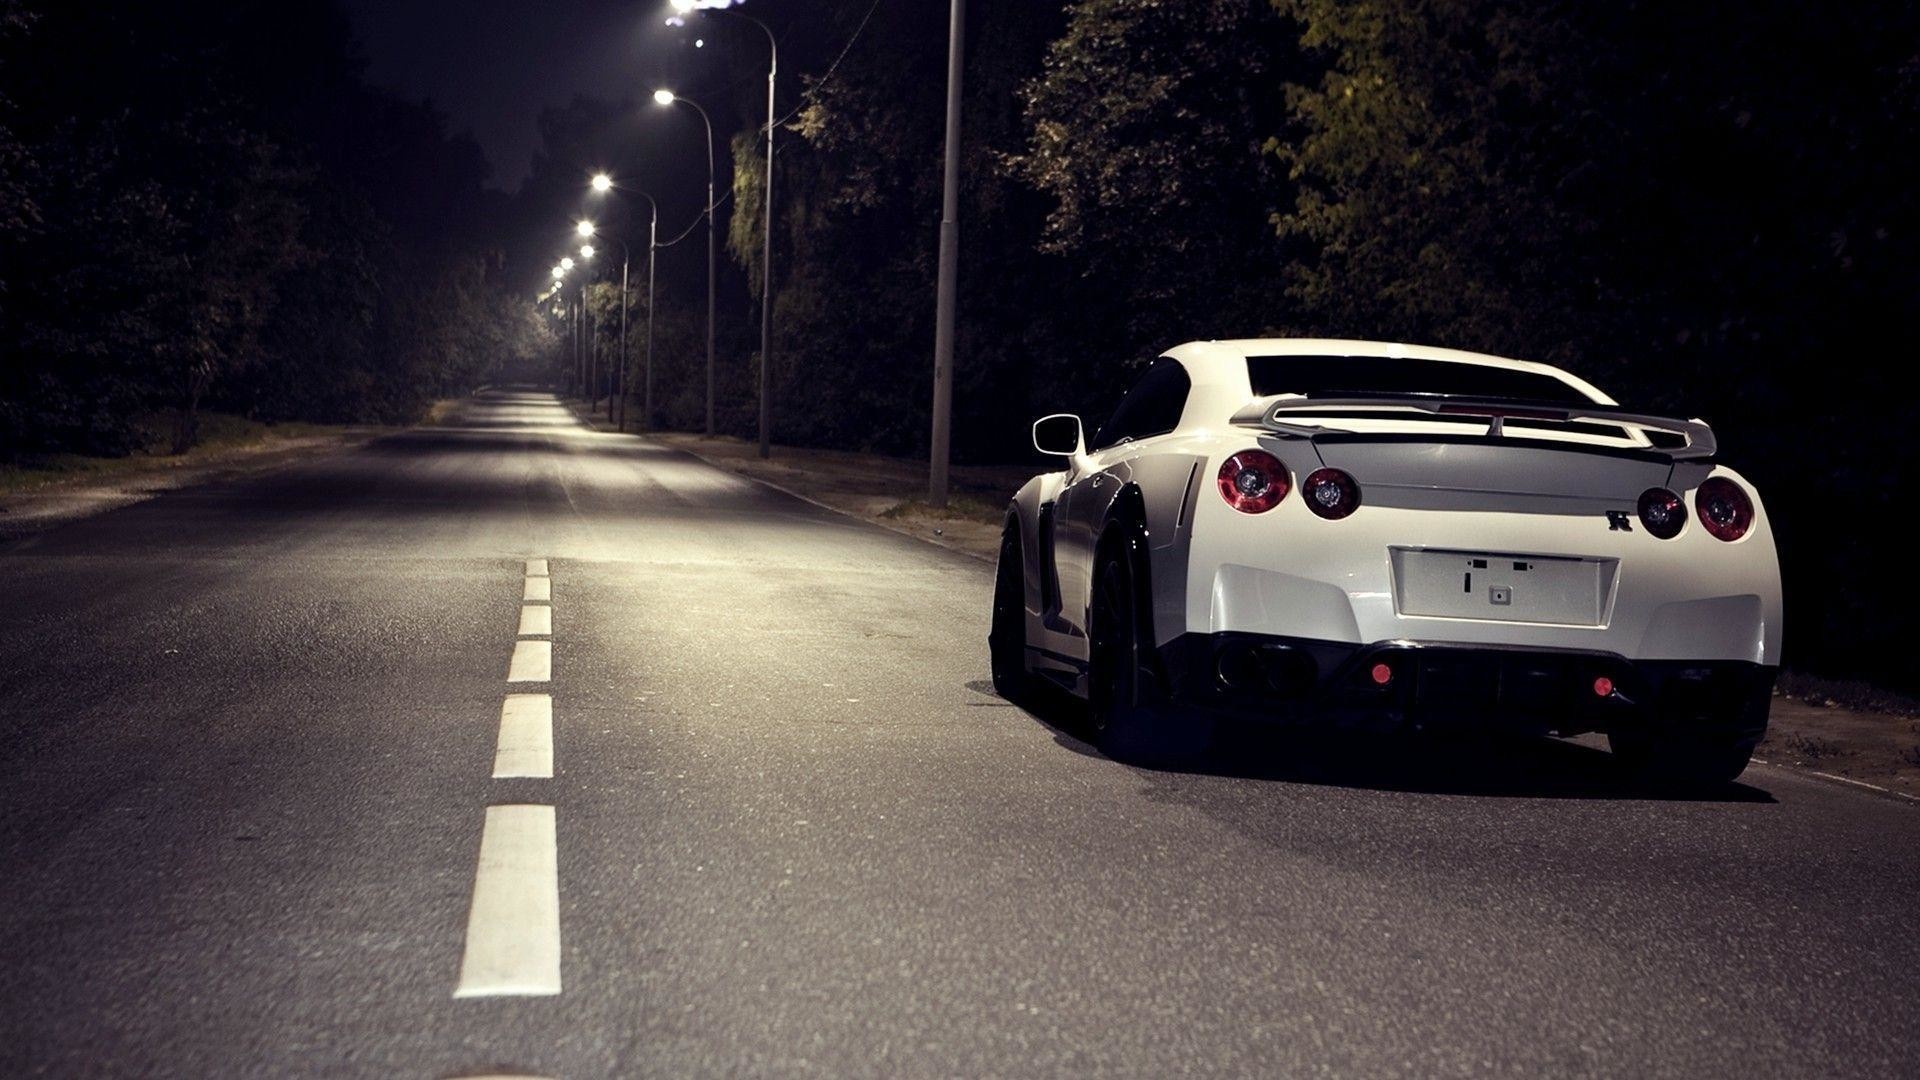 1920x1080 Nissan GT-R HD Wallpapers | TanukinoSippo.